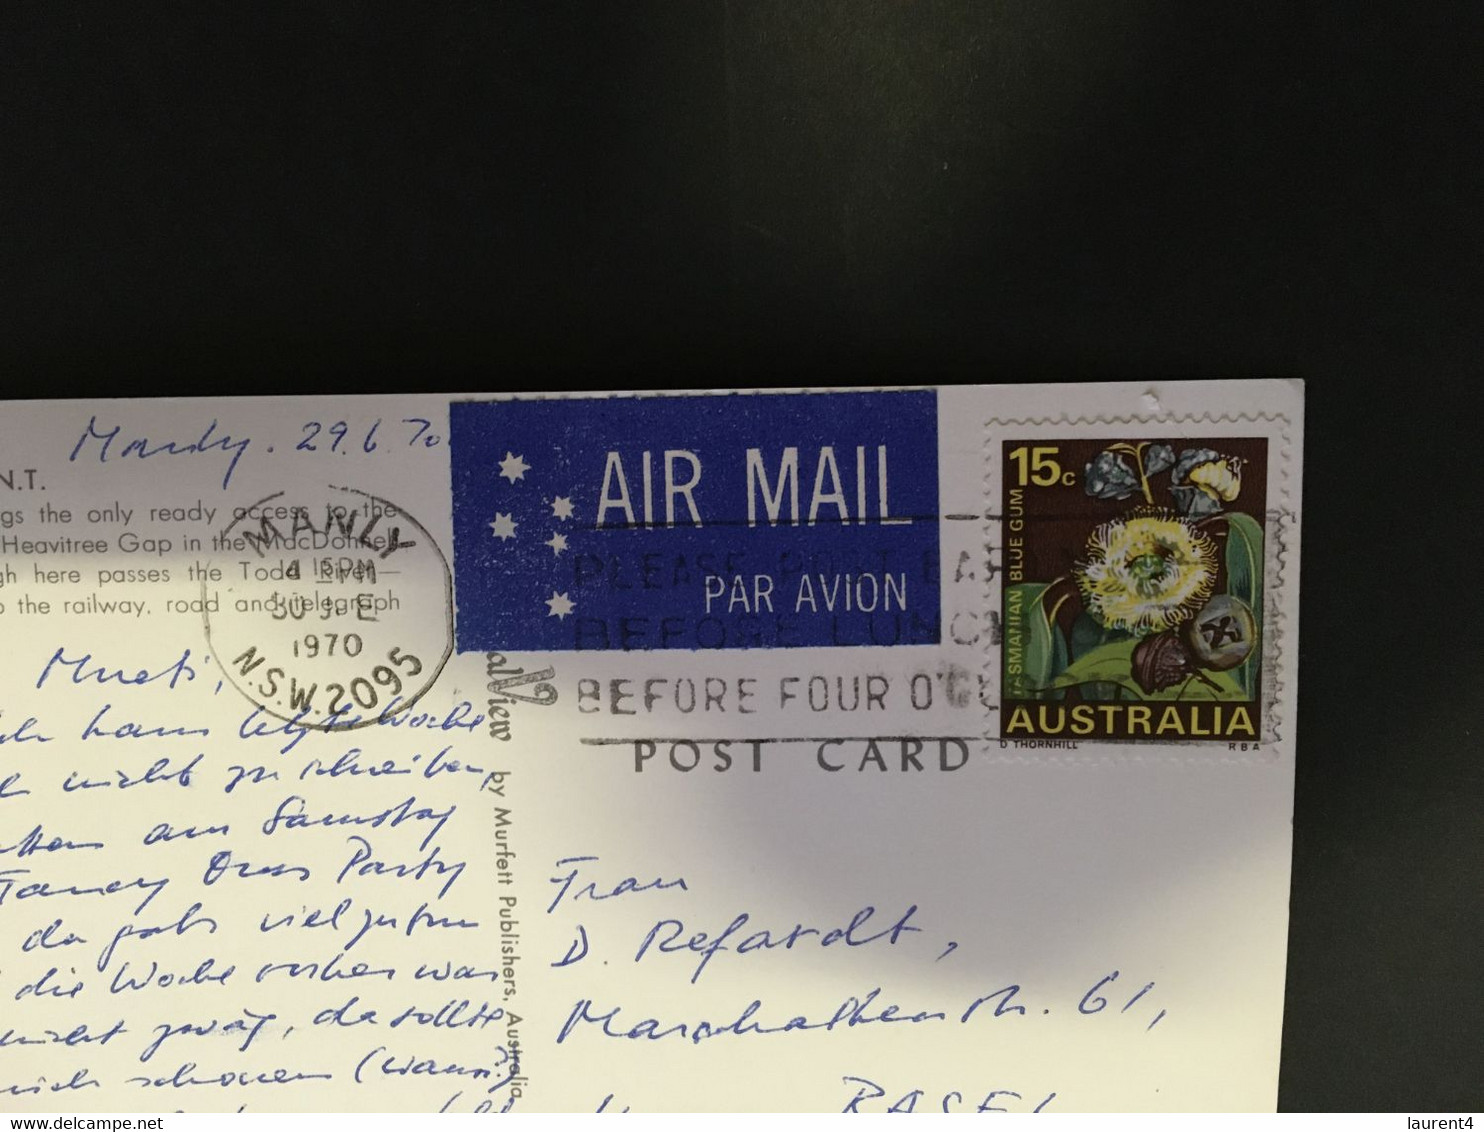 (NN 14) Australia - (with Stamps) - NT - Heavitree Gap (posted 1970) - Posted To Switzerland - The Red Centre